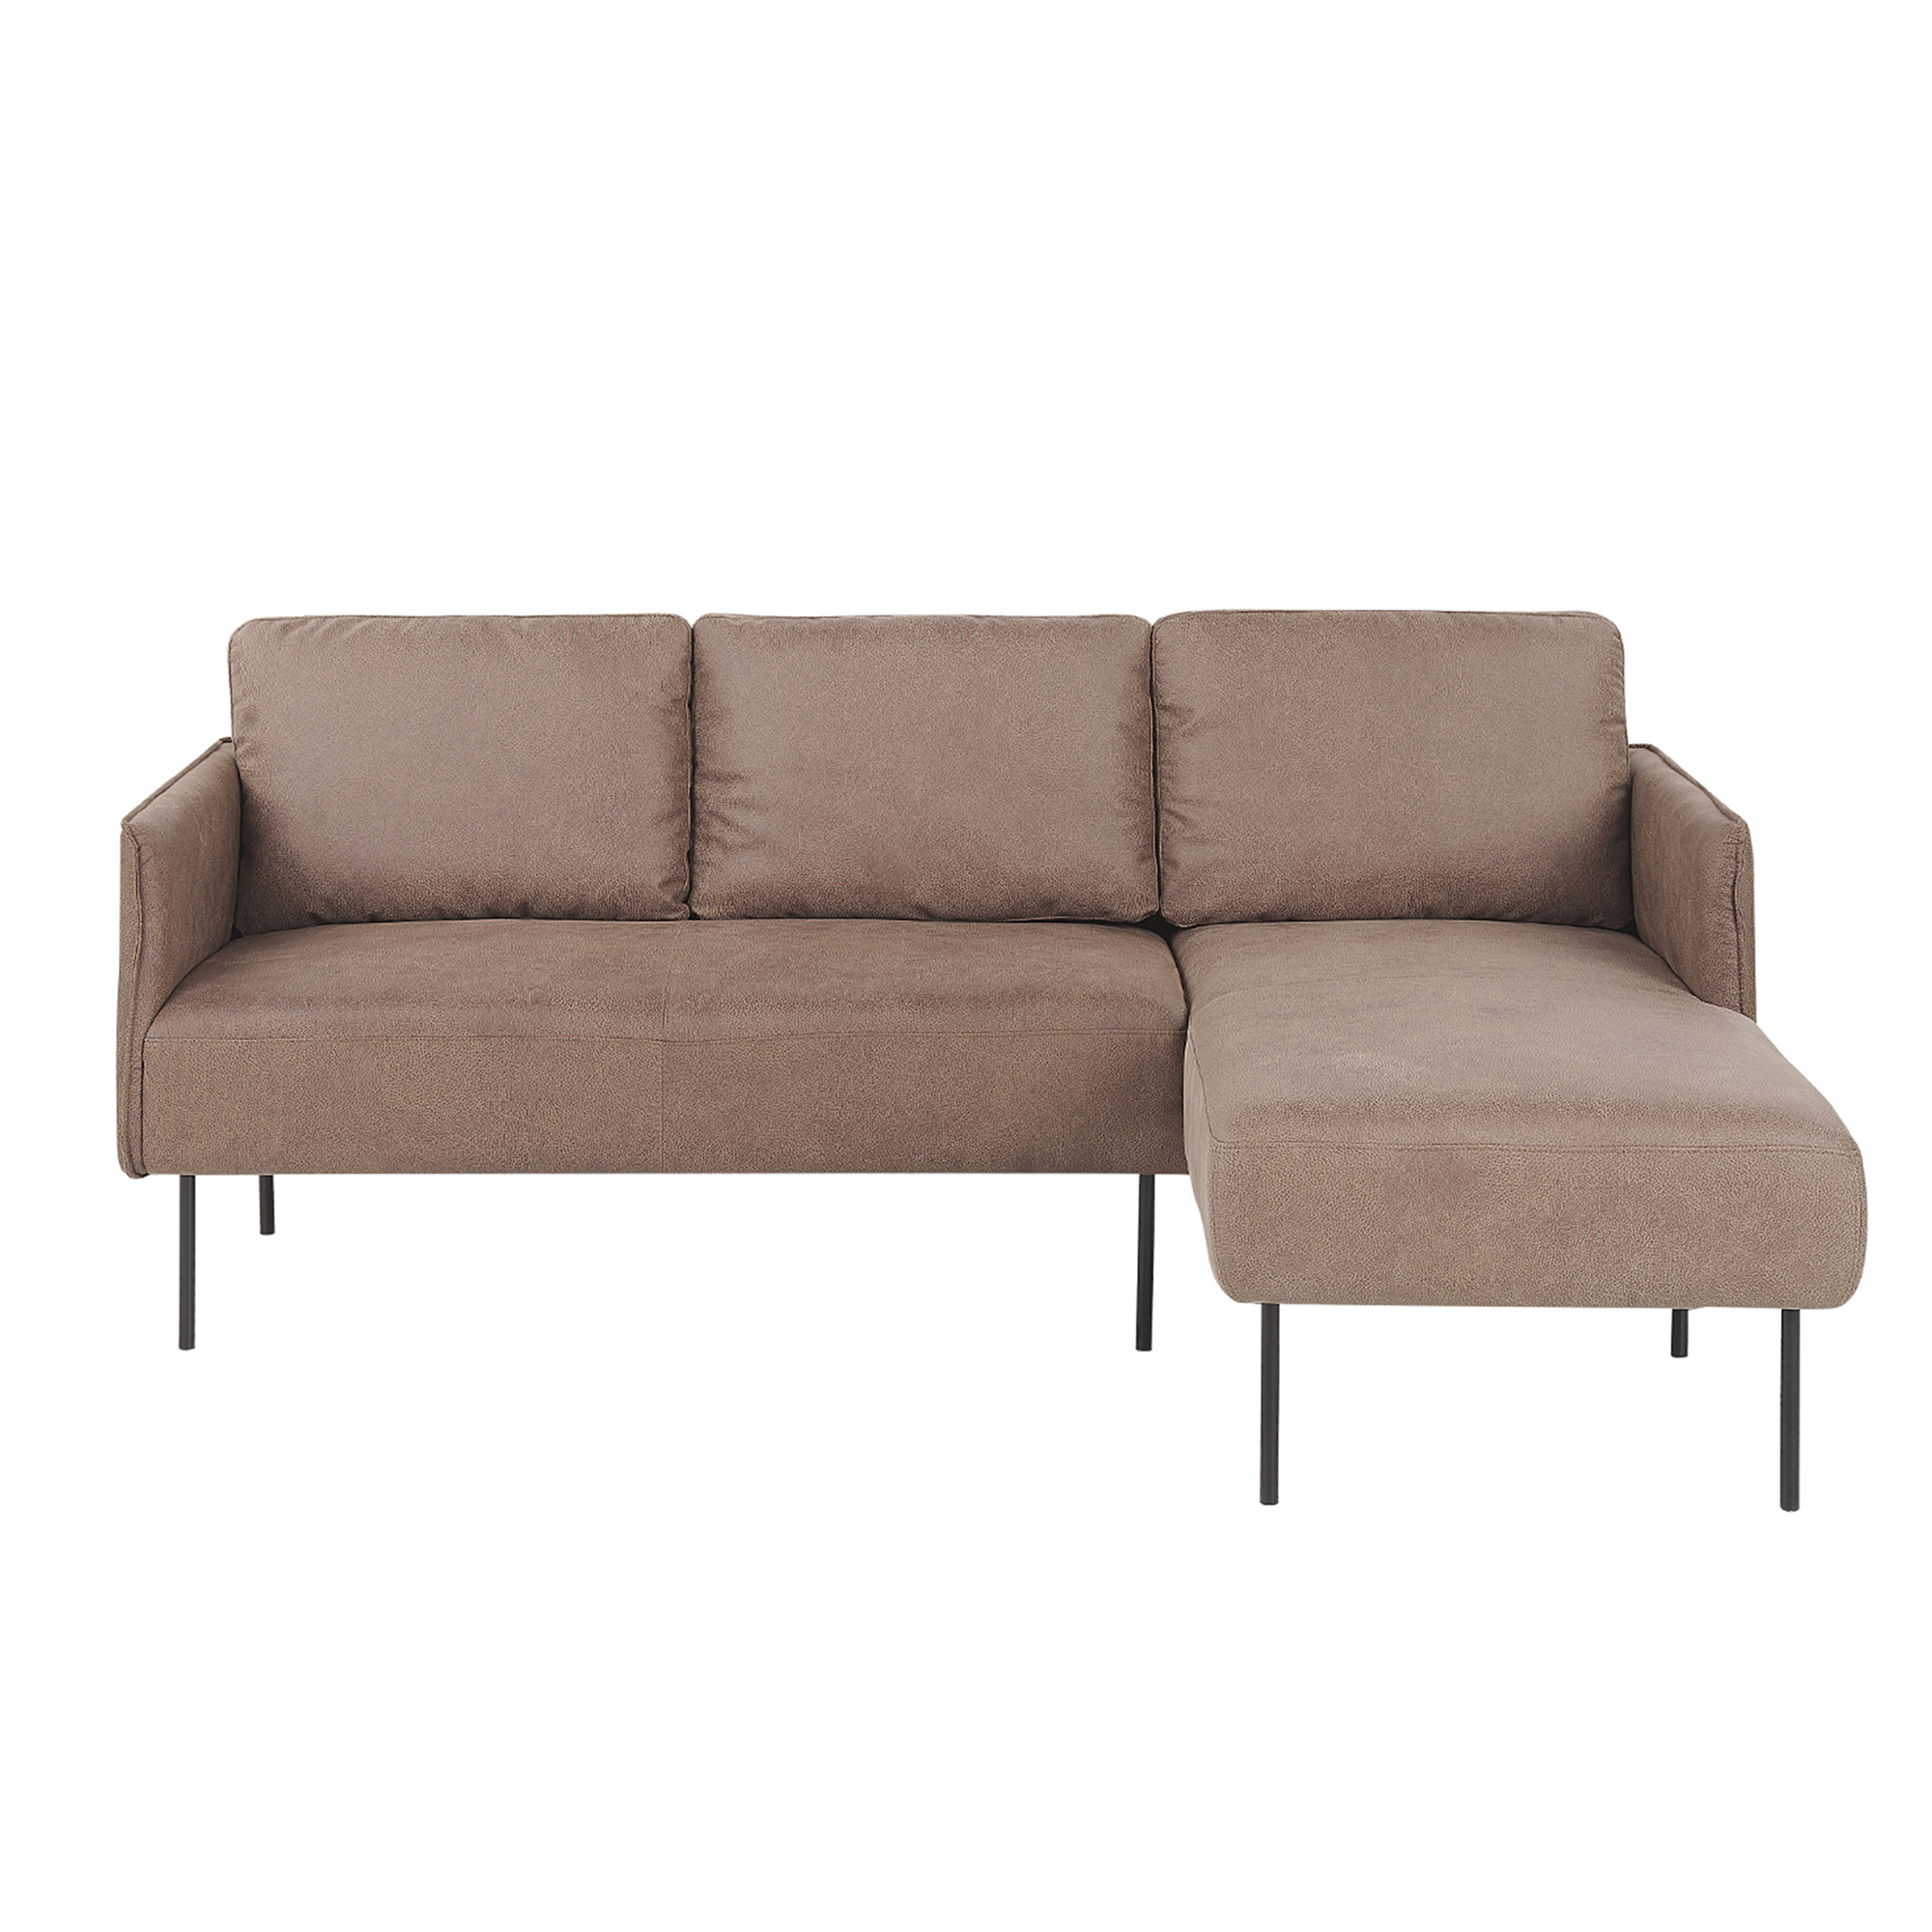 Beliani Corner Sofa Couch Brown Fabric Upholstered L-shaped Left Hand Orientation